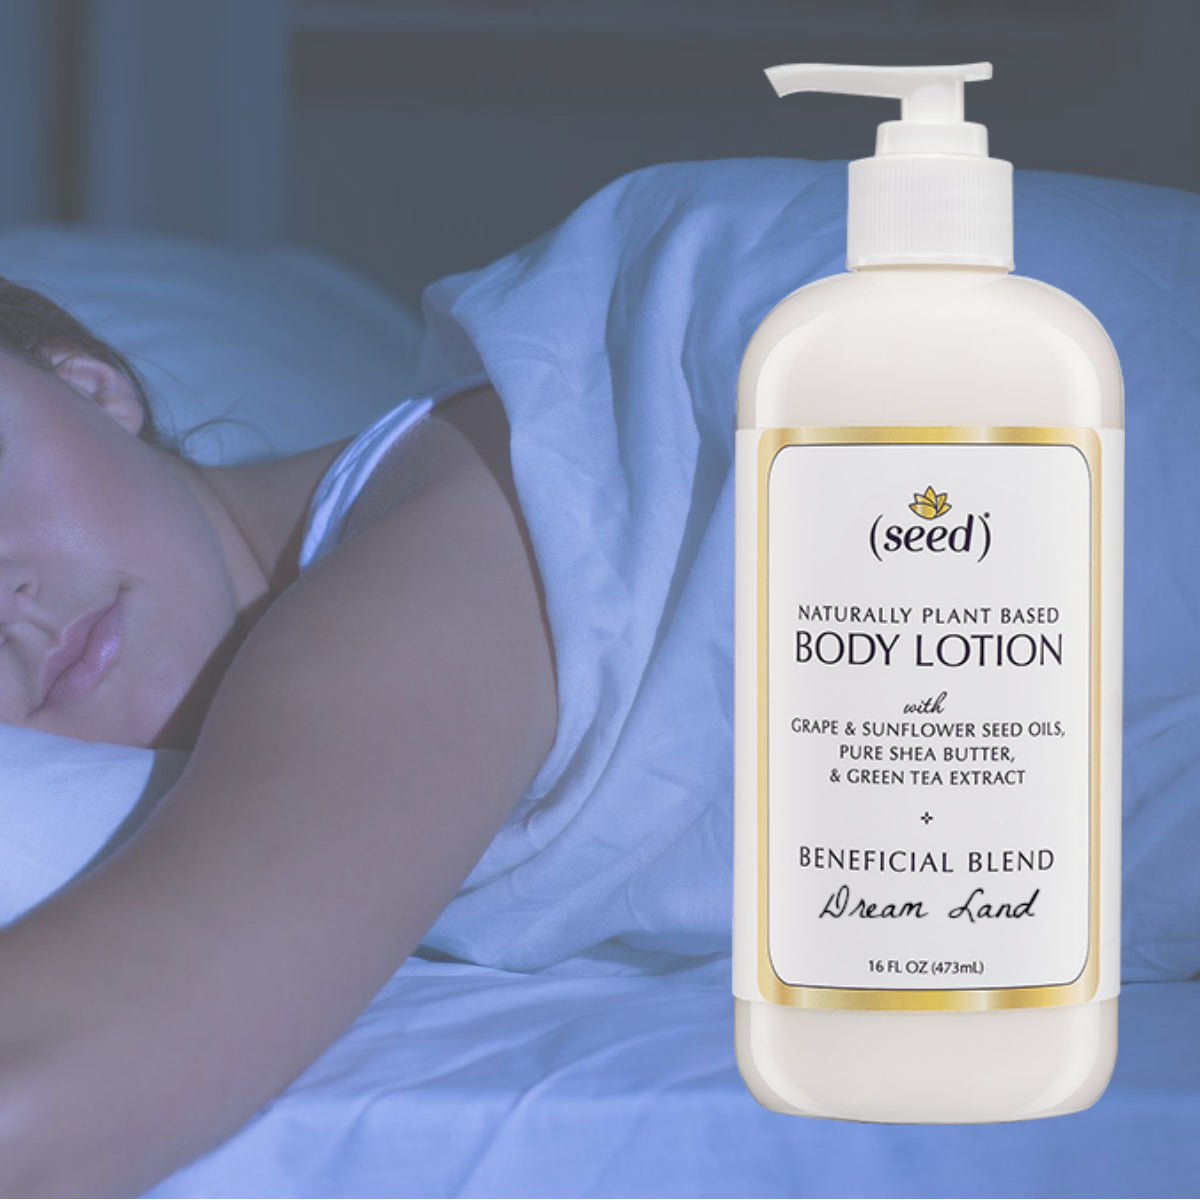 Seed Dream Land Blend Body Lotion features essential oils of lemon, lavender, and ginger